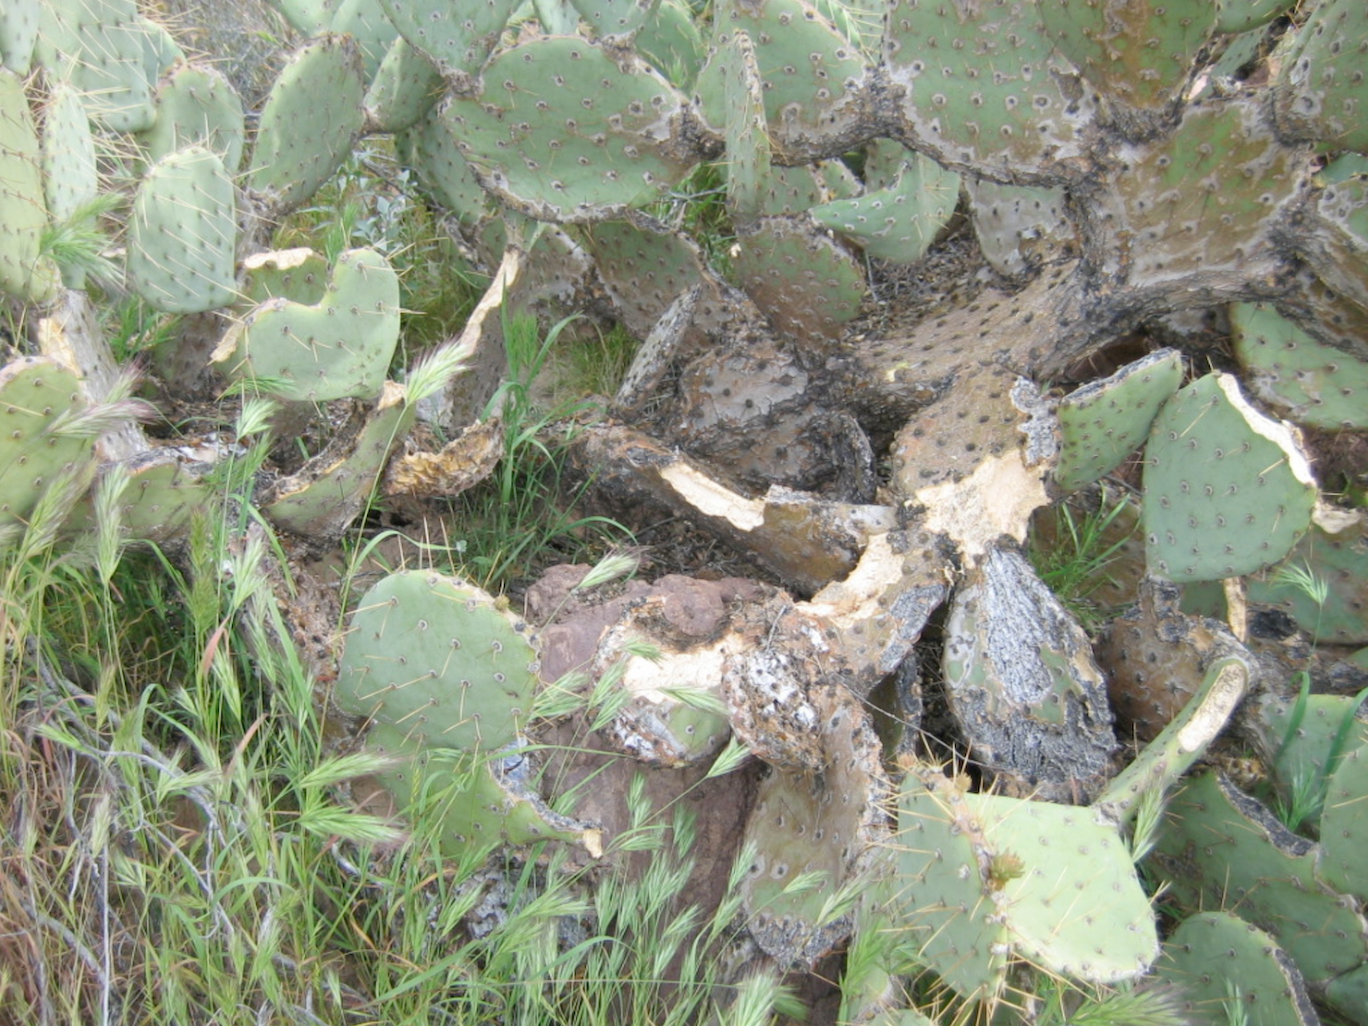 Figure 3. The prickly pear cactus house found at river mile 220 right. Notice the numerous chew marks, which can be attributed to woodrat herbivory